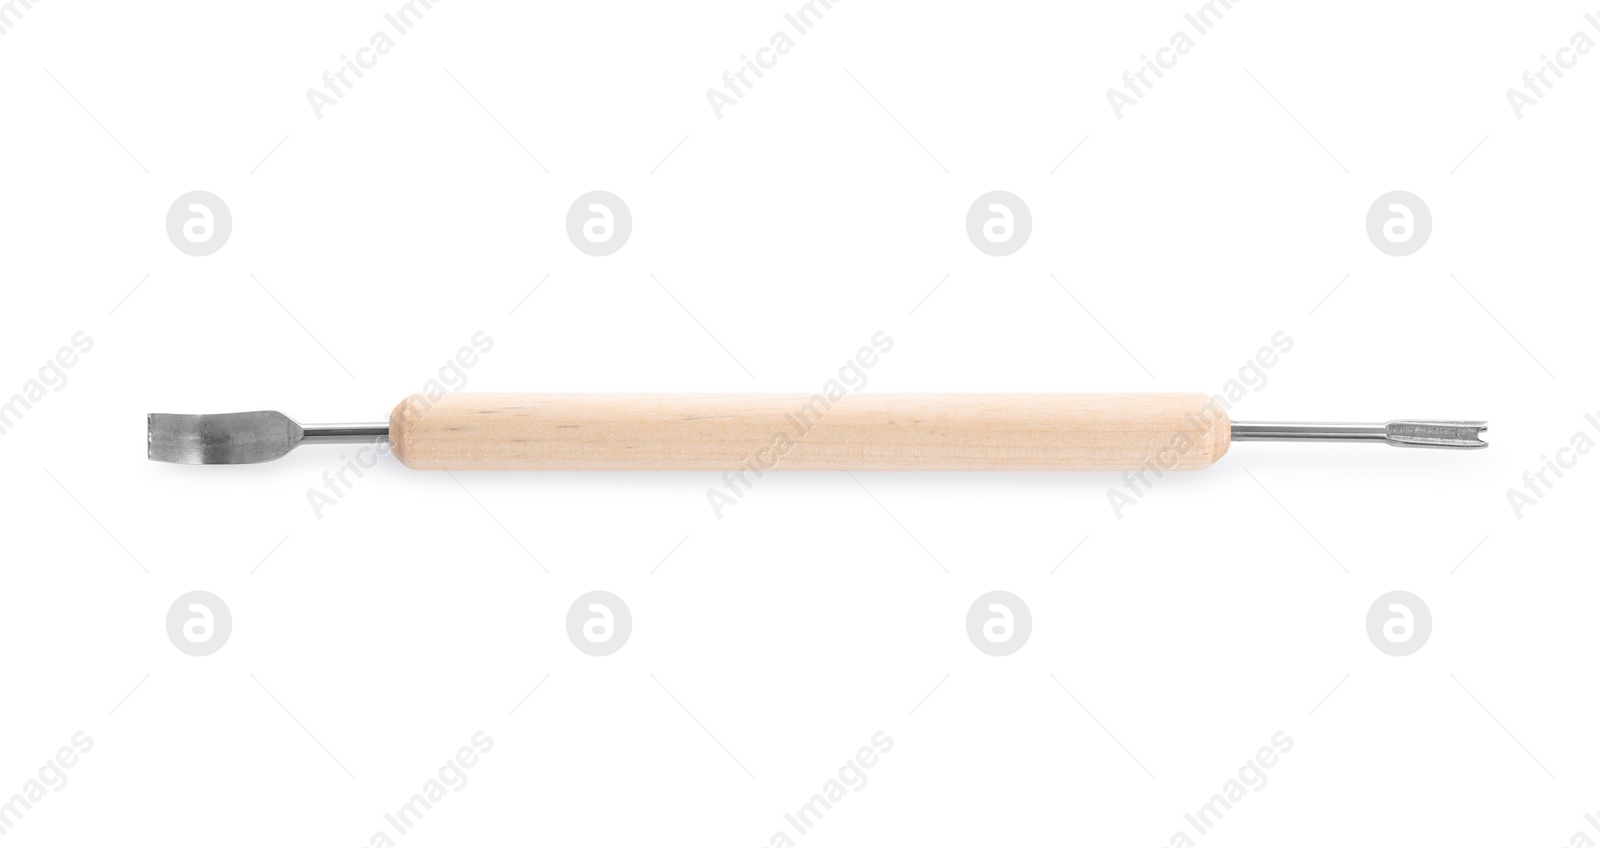 Photo of One wooden clay crafting tool isolated on white, top view